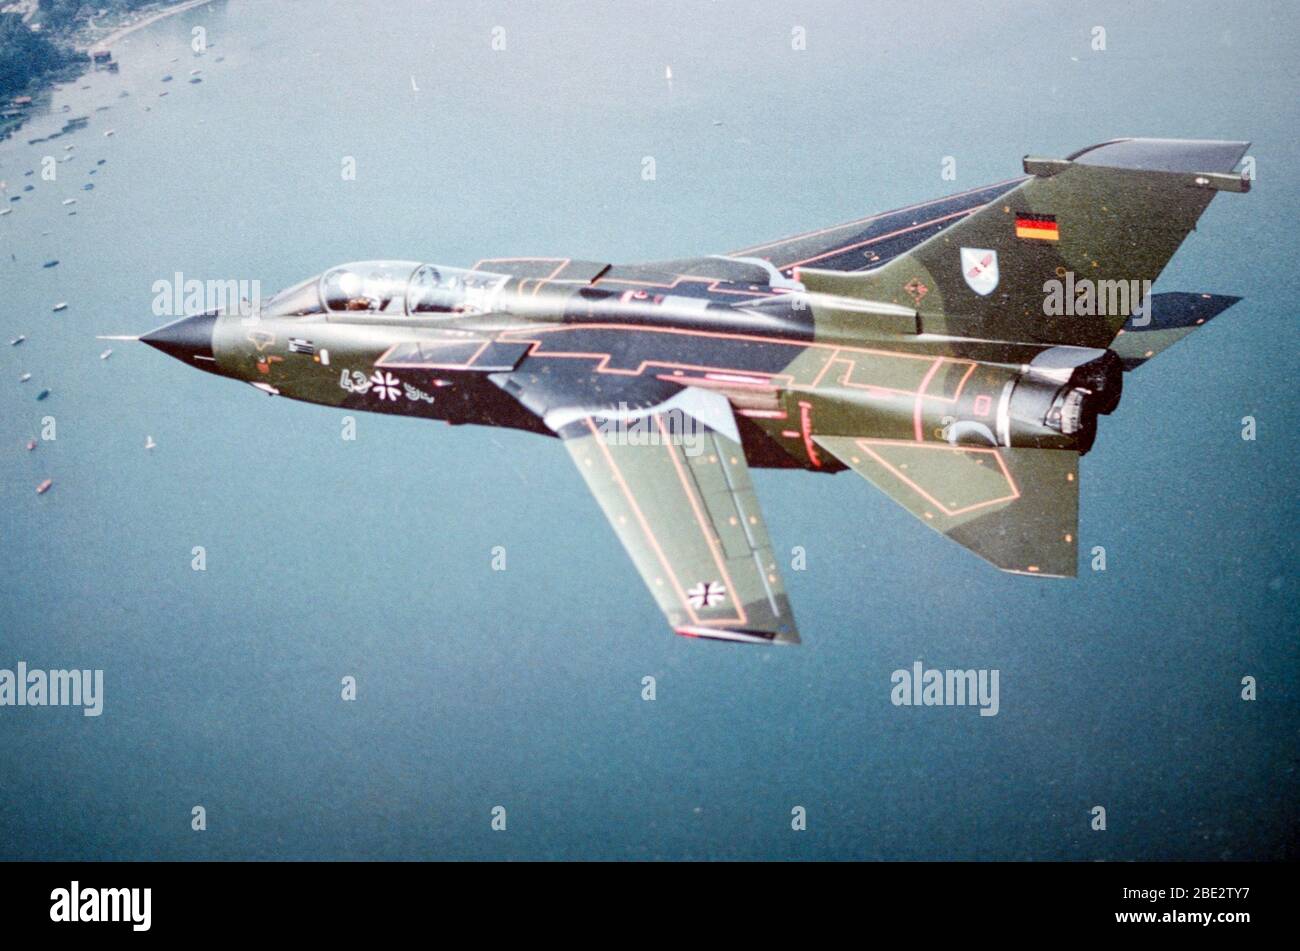 Air to air photograph showing a german Luftwaffe Panavia Tornado 43+94 fighter. Stock Photo